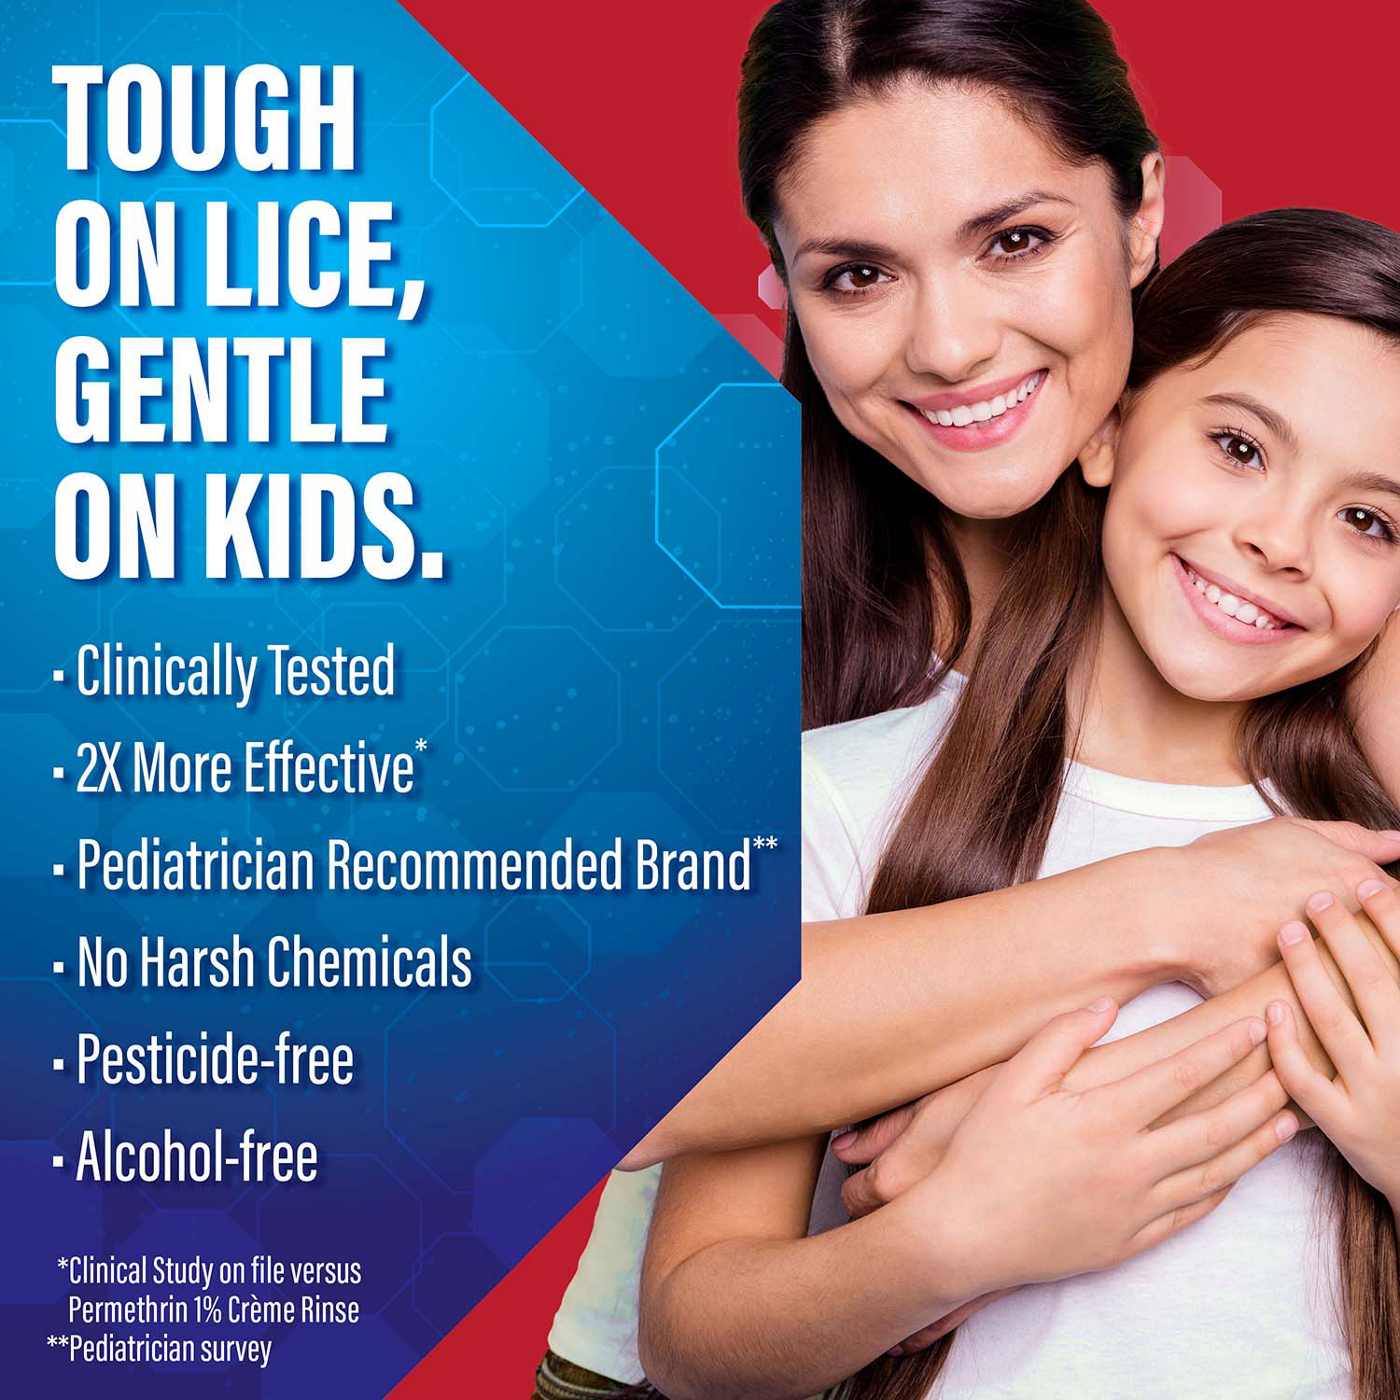 RID Super Max 5-in-1 Complete Lice Elimination Treatment Kit; image 6 of 6